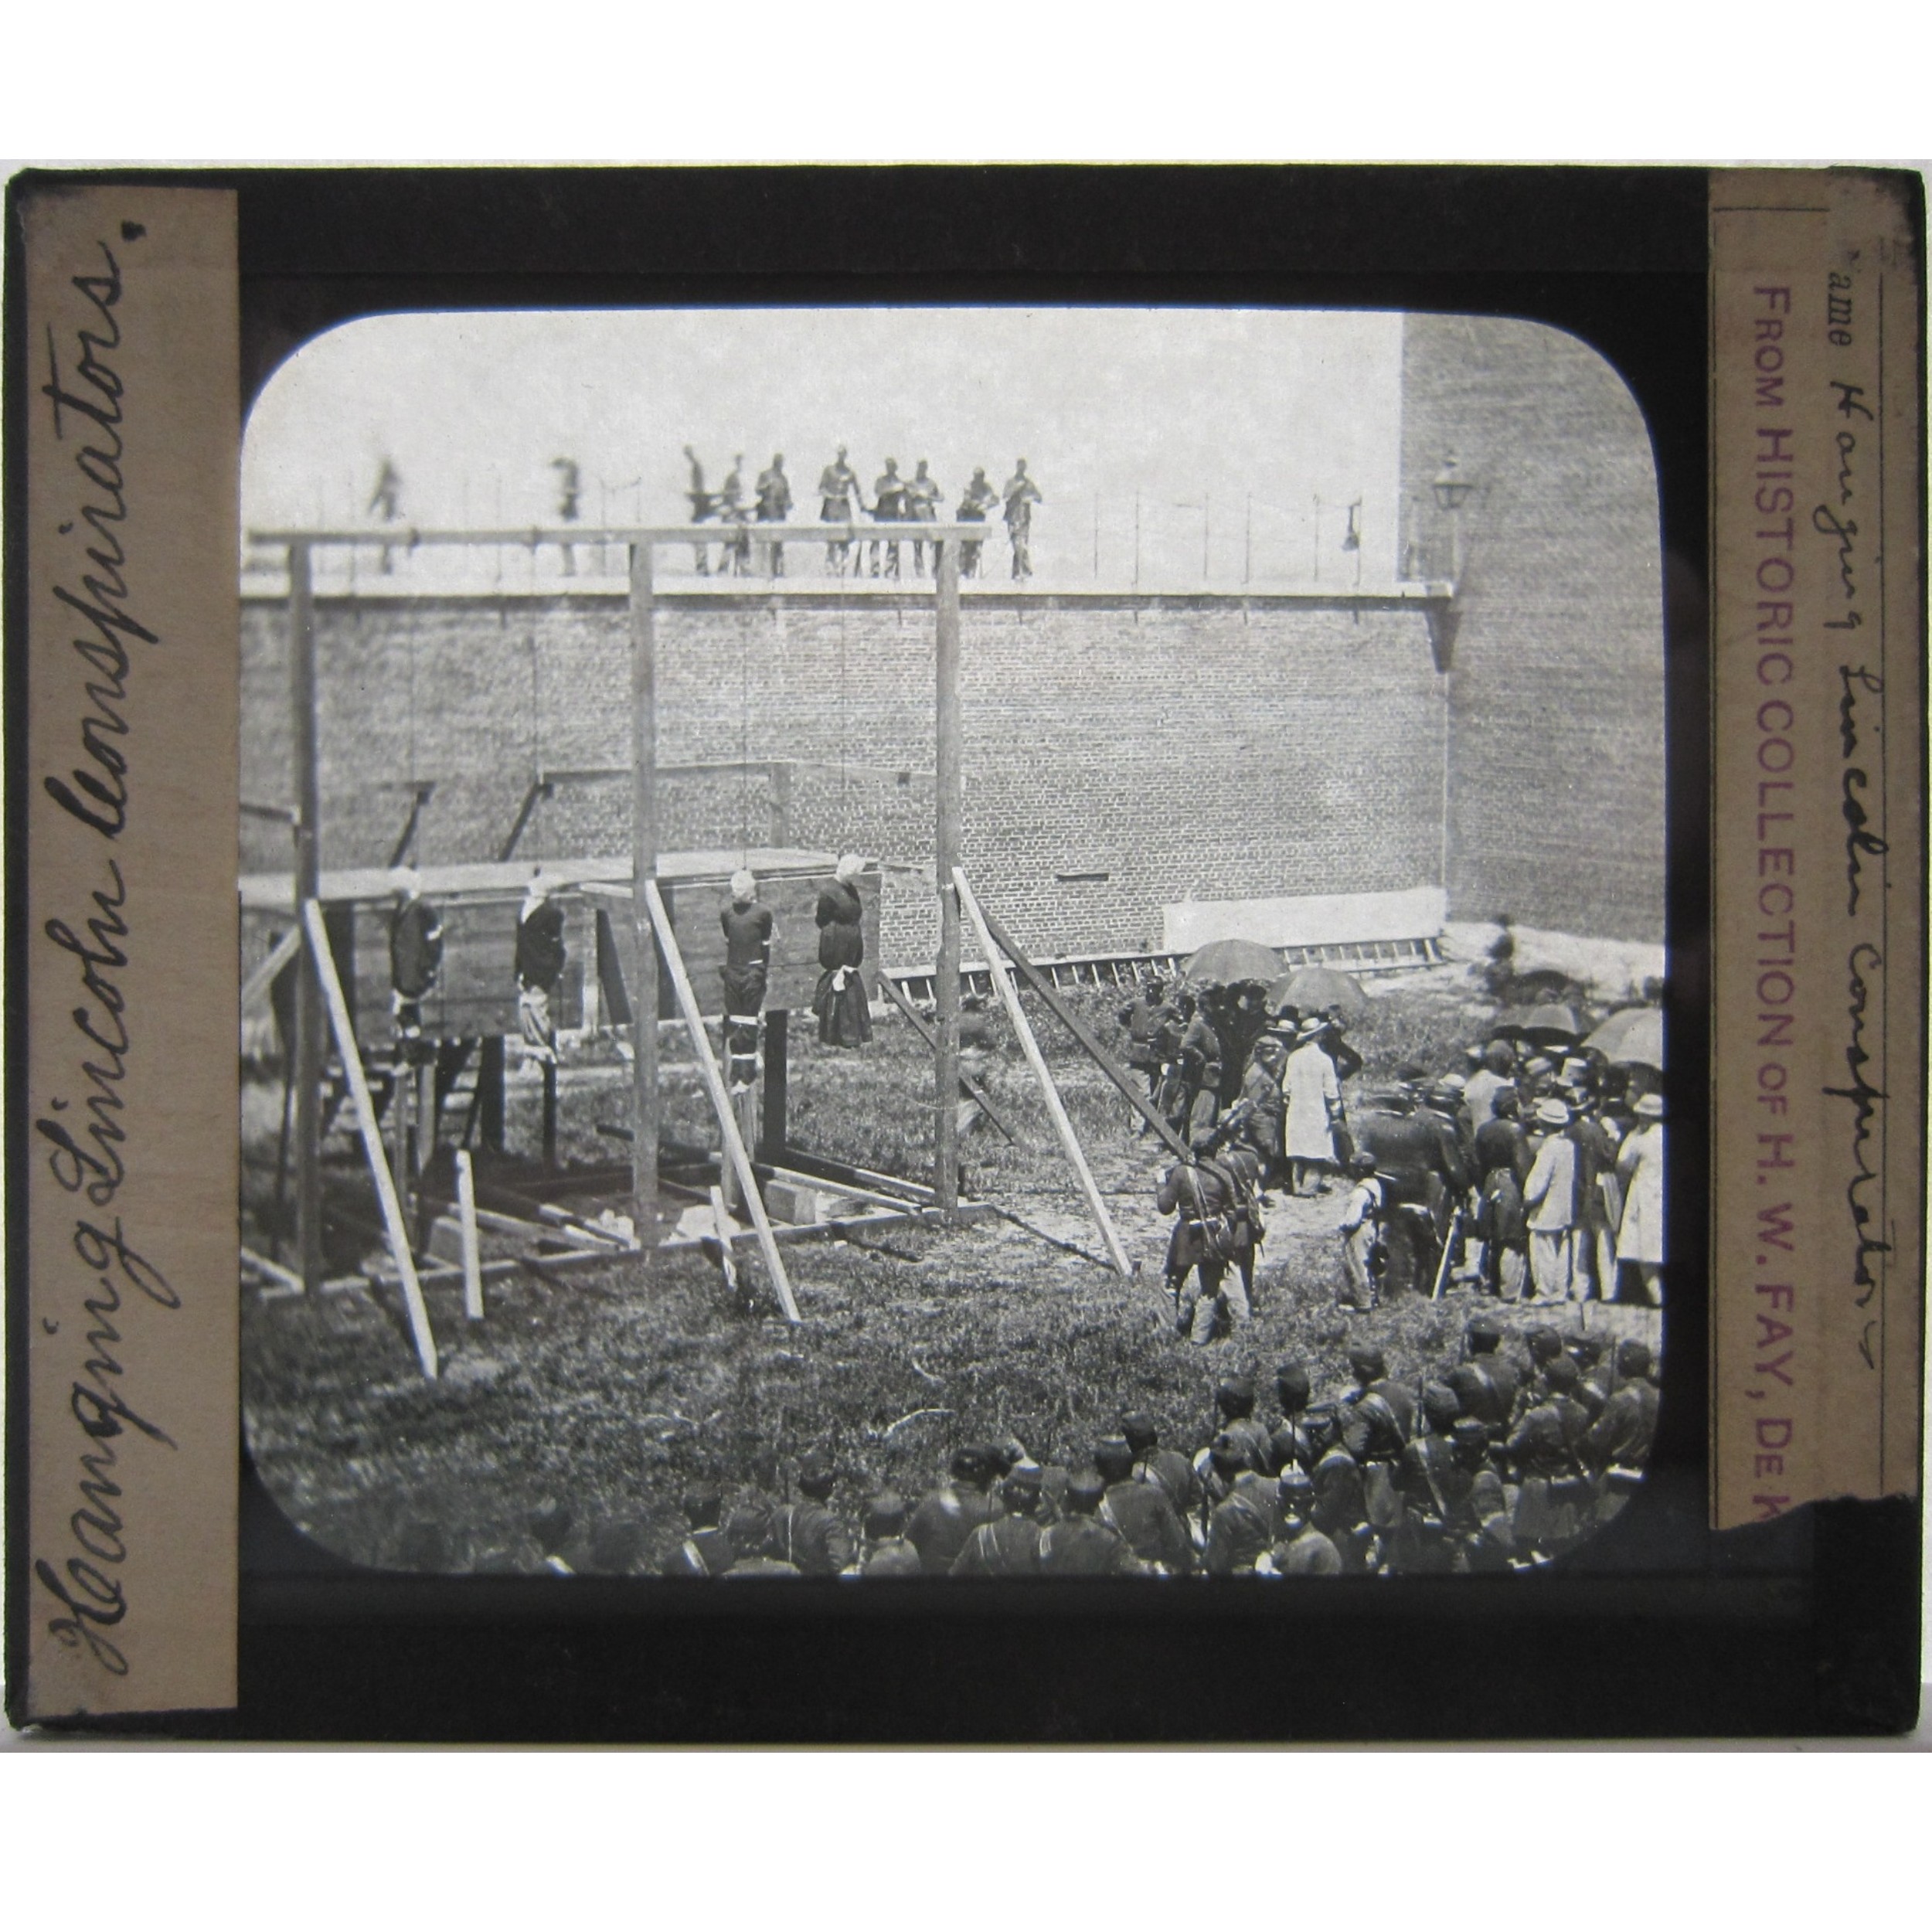 Glass slide of the hanging of Lincoln conspirators. July 7, 1865